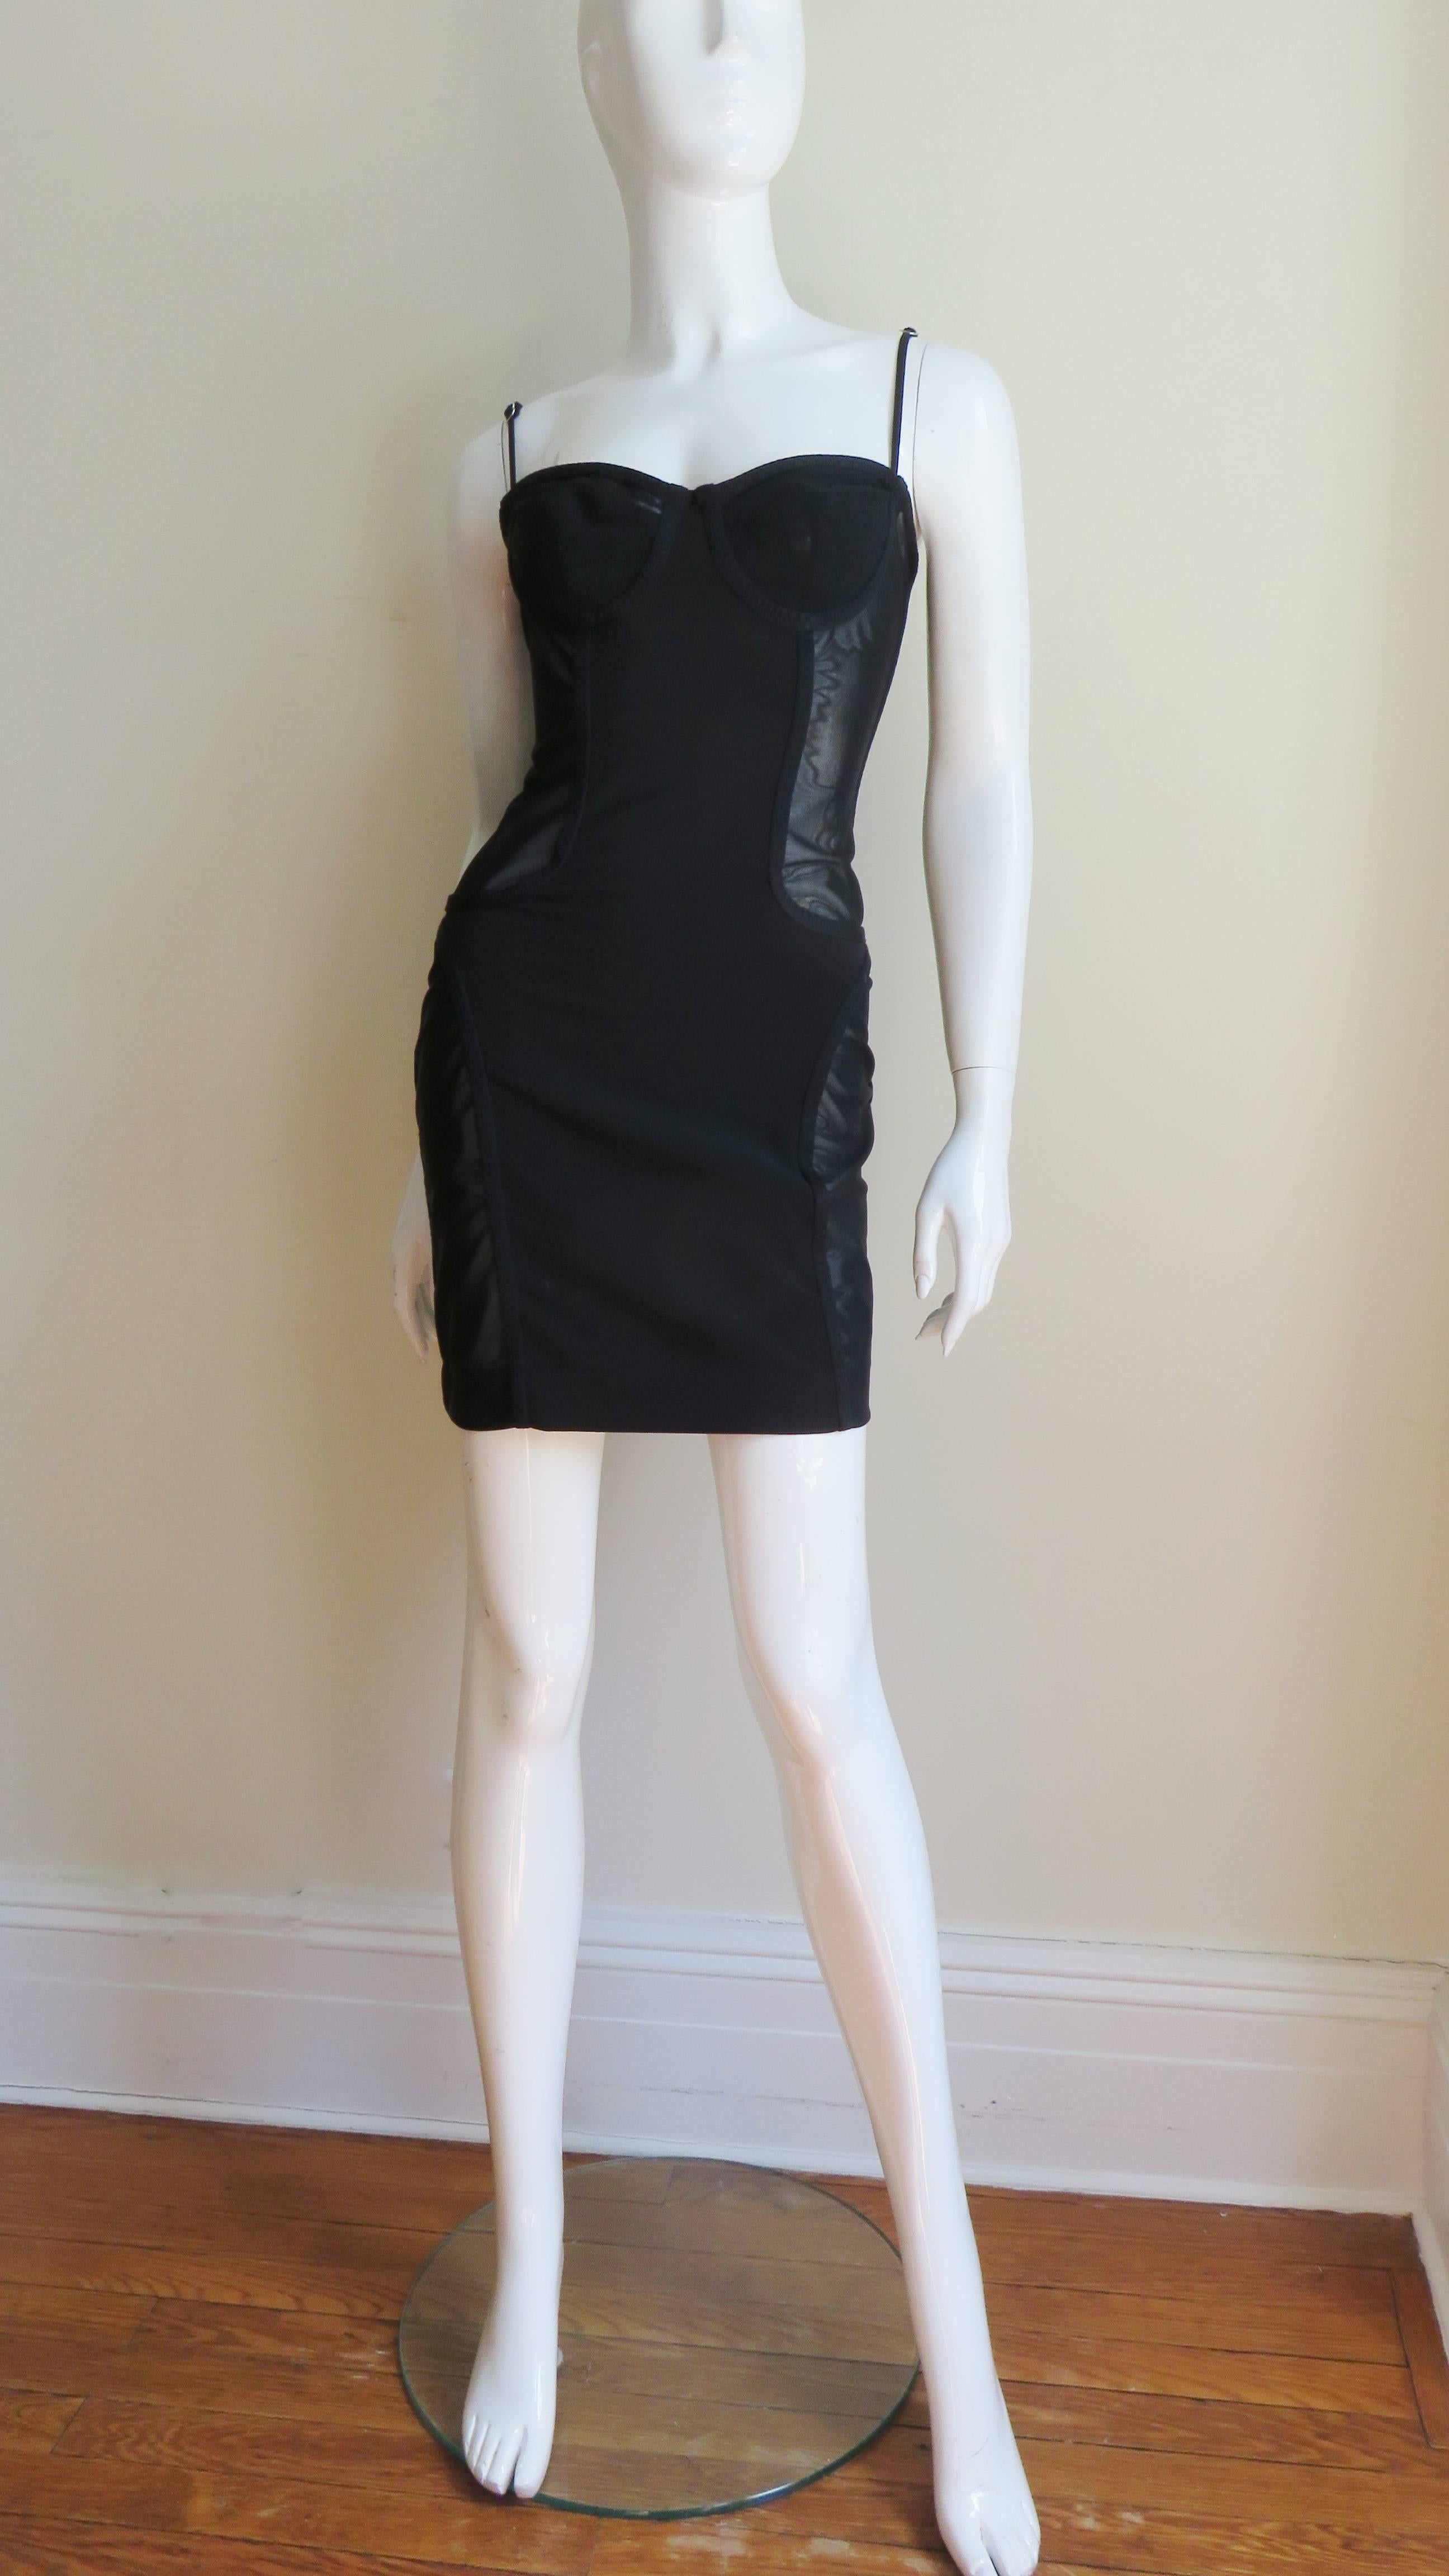 dress with black side panels